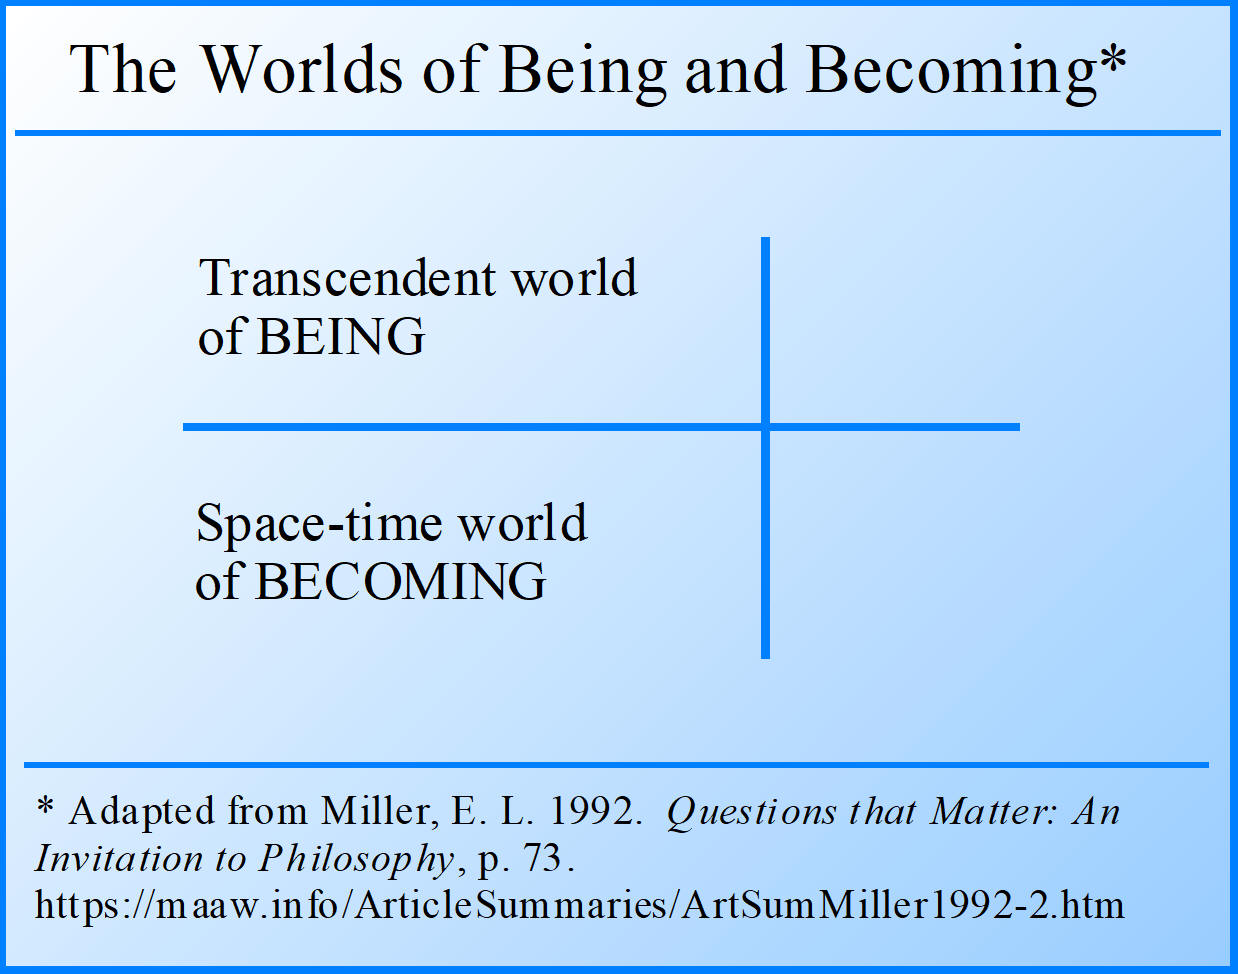 The Worlds of Being and Becoming